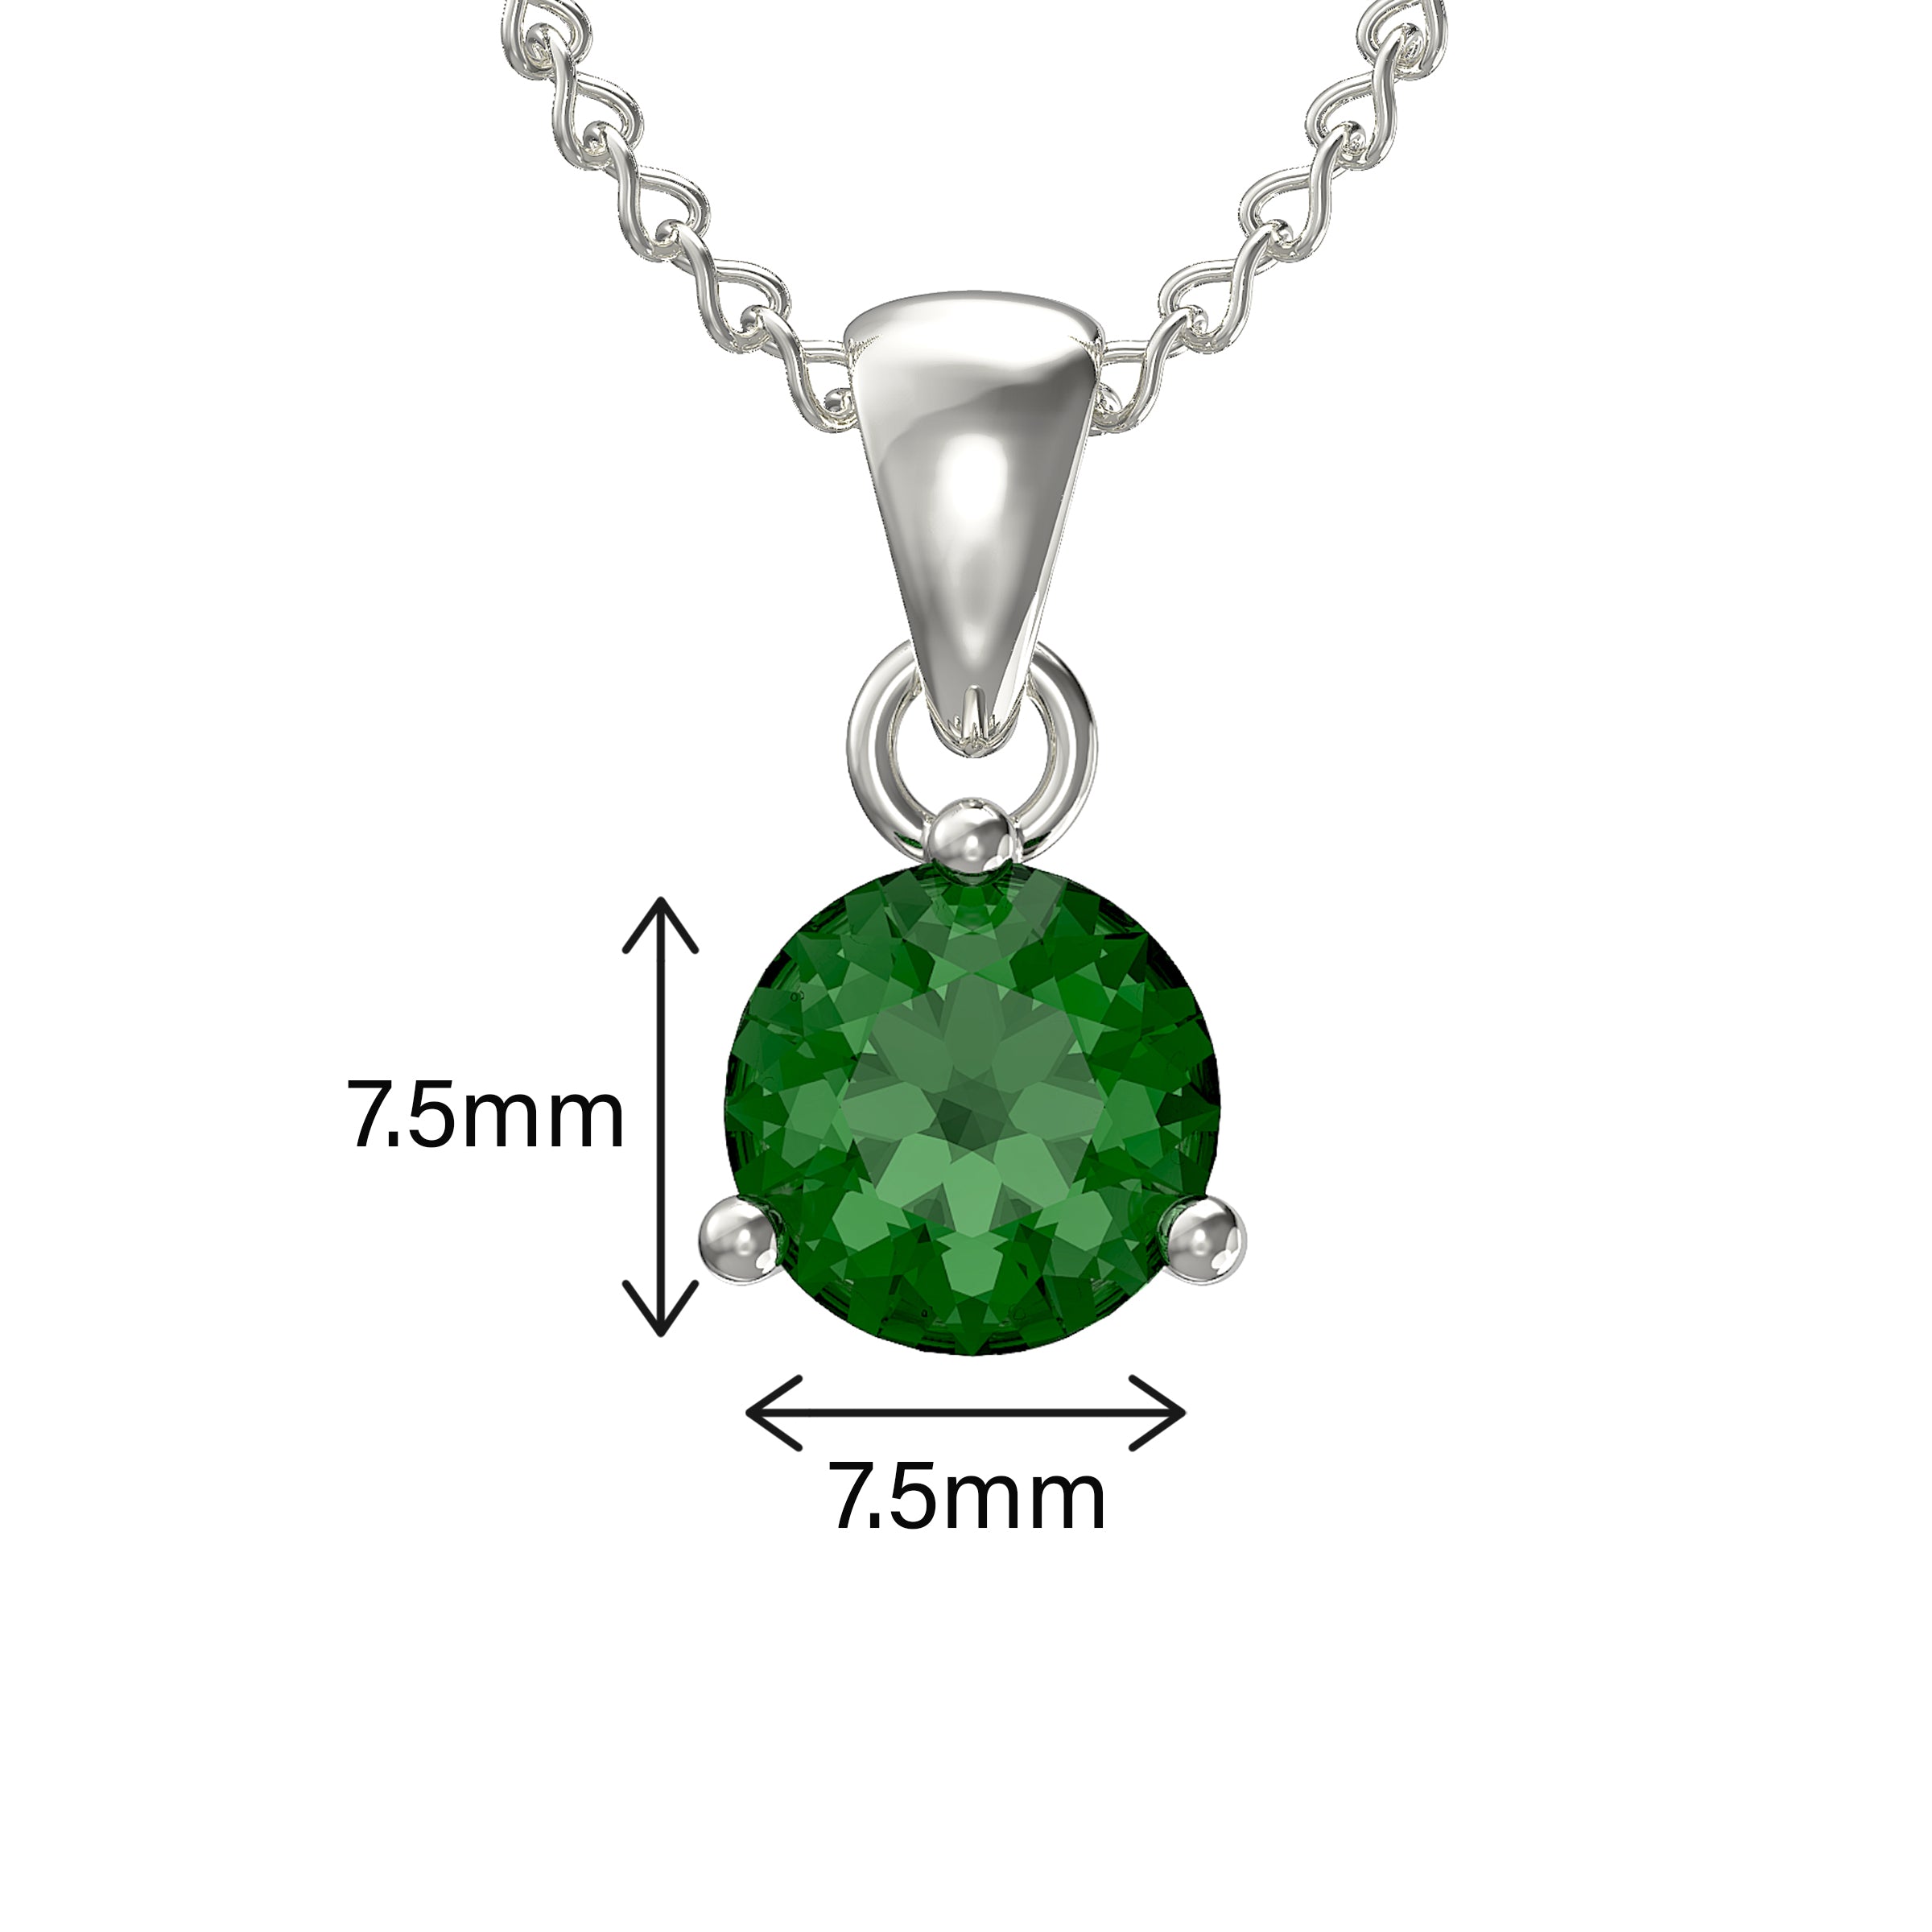 ChicSilver Women May Birthstone Necklace 925 Sterling Silver Small Dark Green Crystal Emerald Pendant Heart Pendant Necklace for Women, Women's